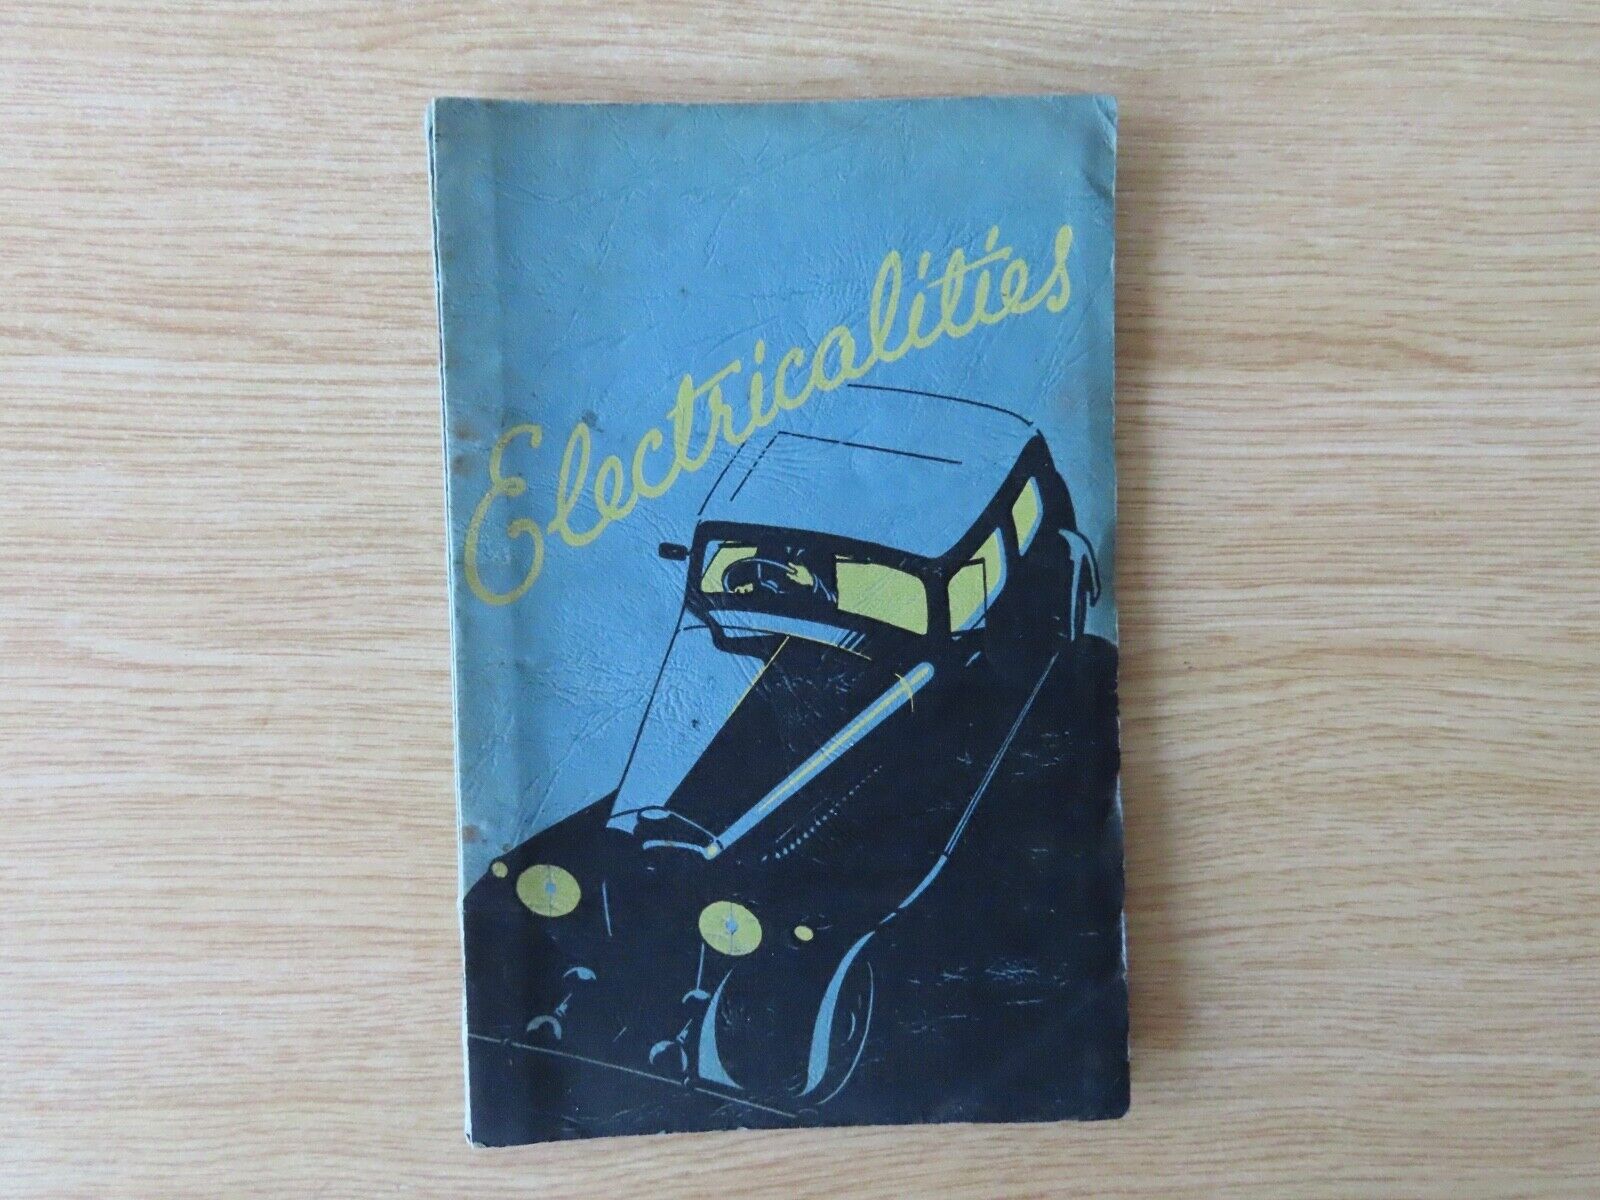 Vintage 1930\'s Joseph Lucas Electricalities Book, Early Motoring History, Lamp